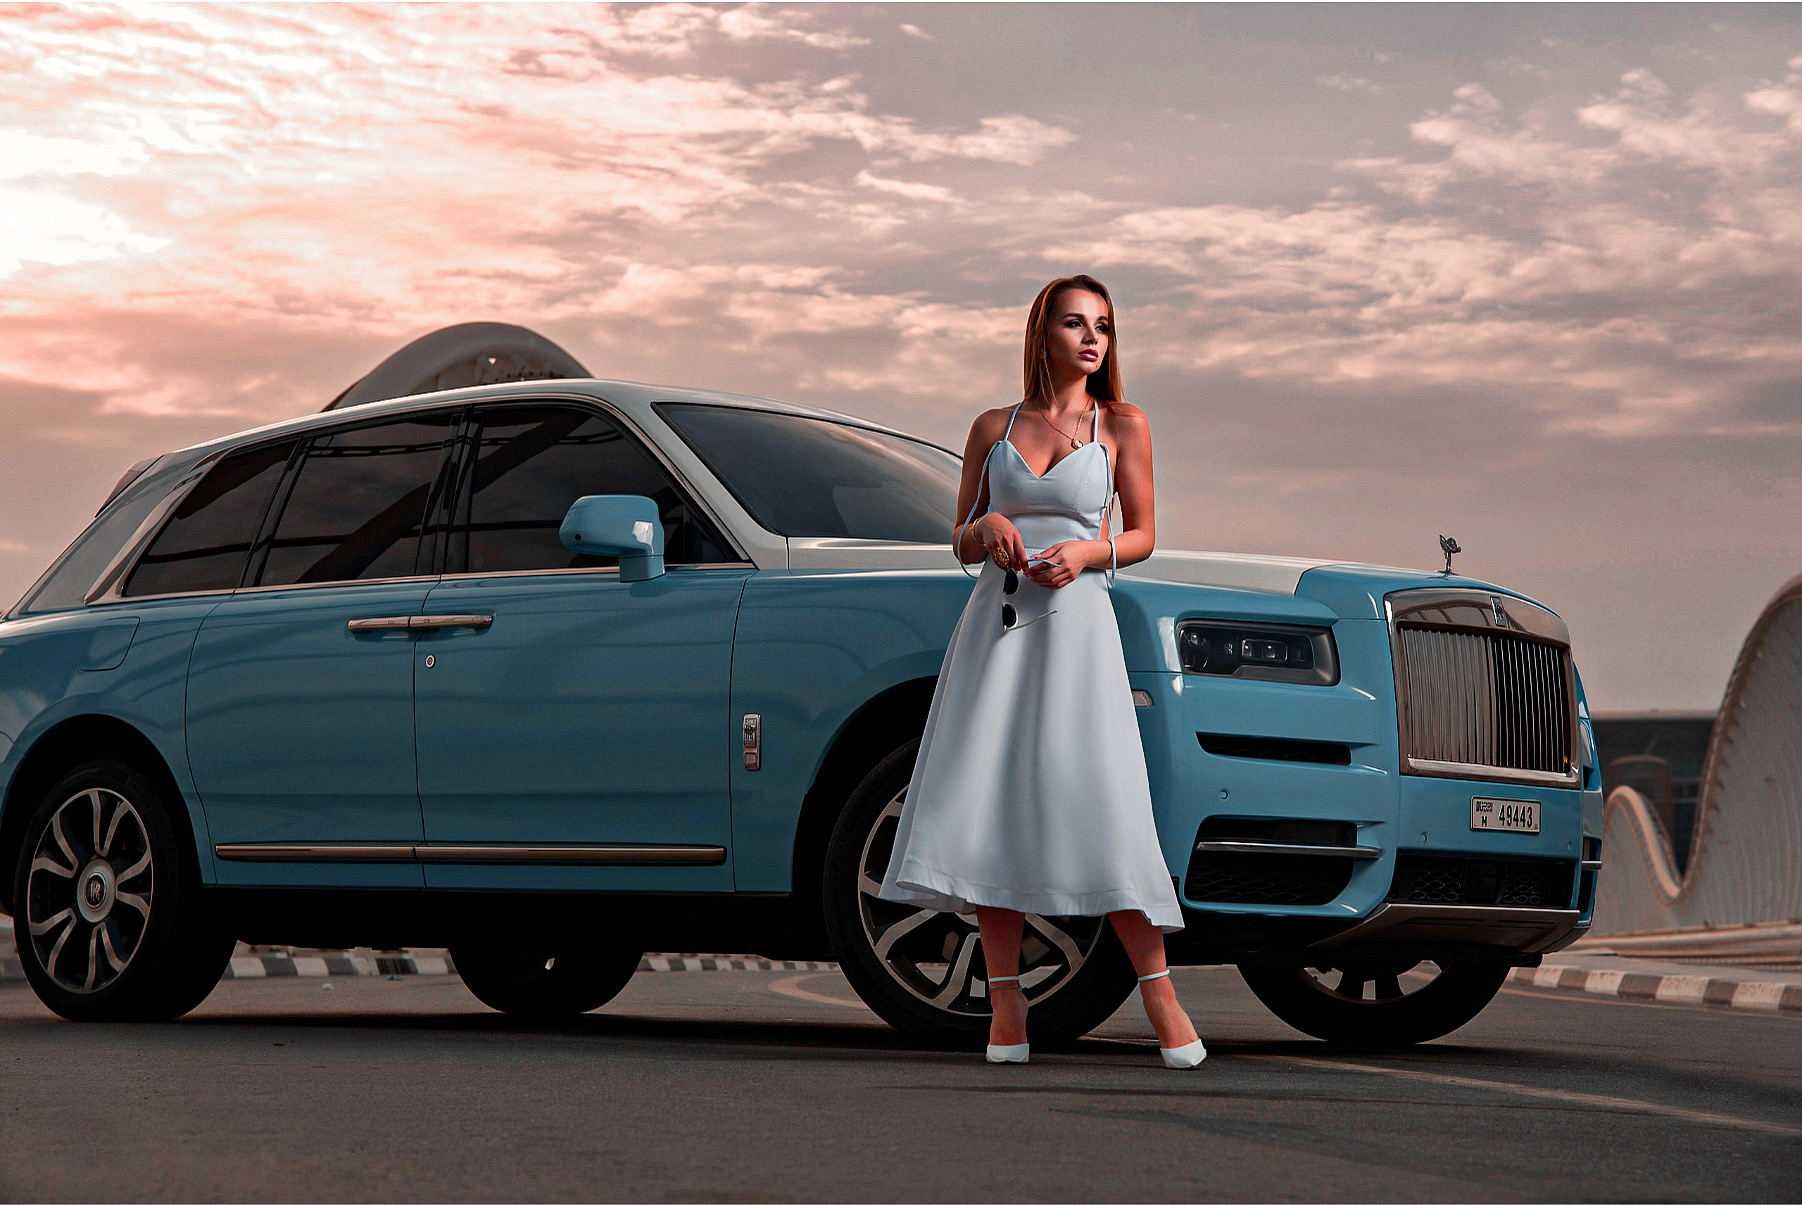 A woman in a white dress posing next to a blue Rolls Royce for a luxury car photoshoot in Dubai.